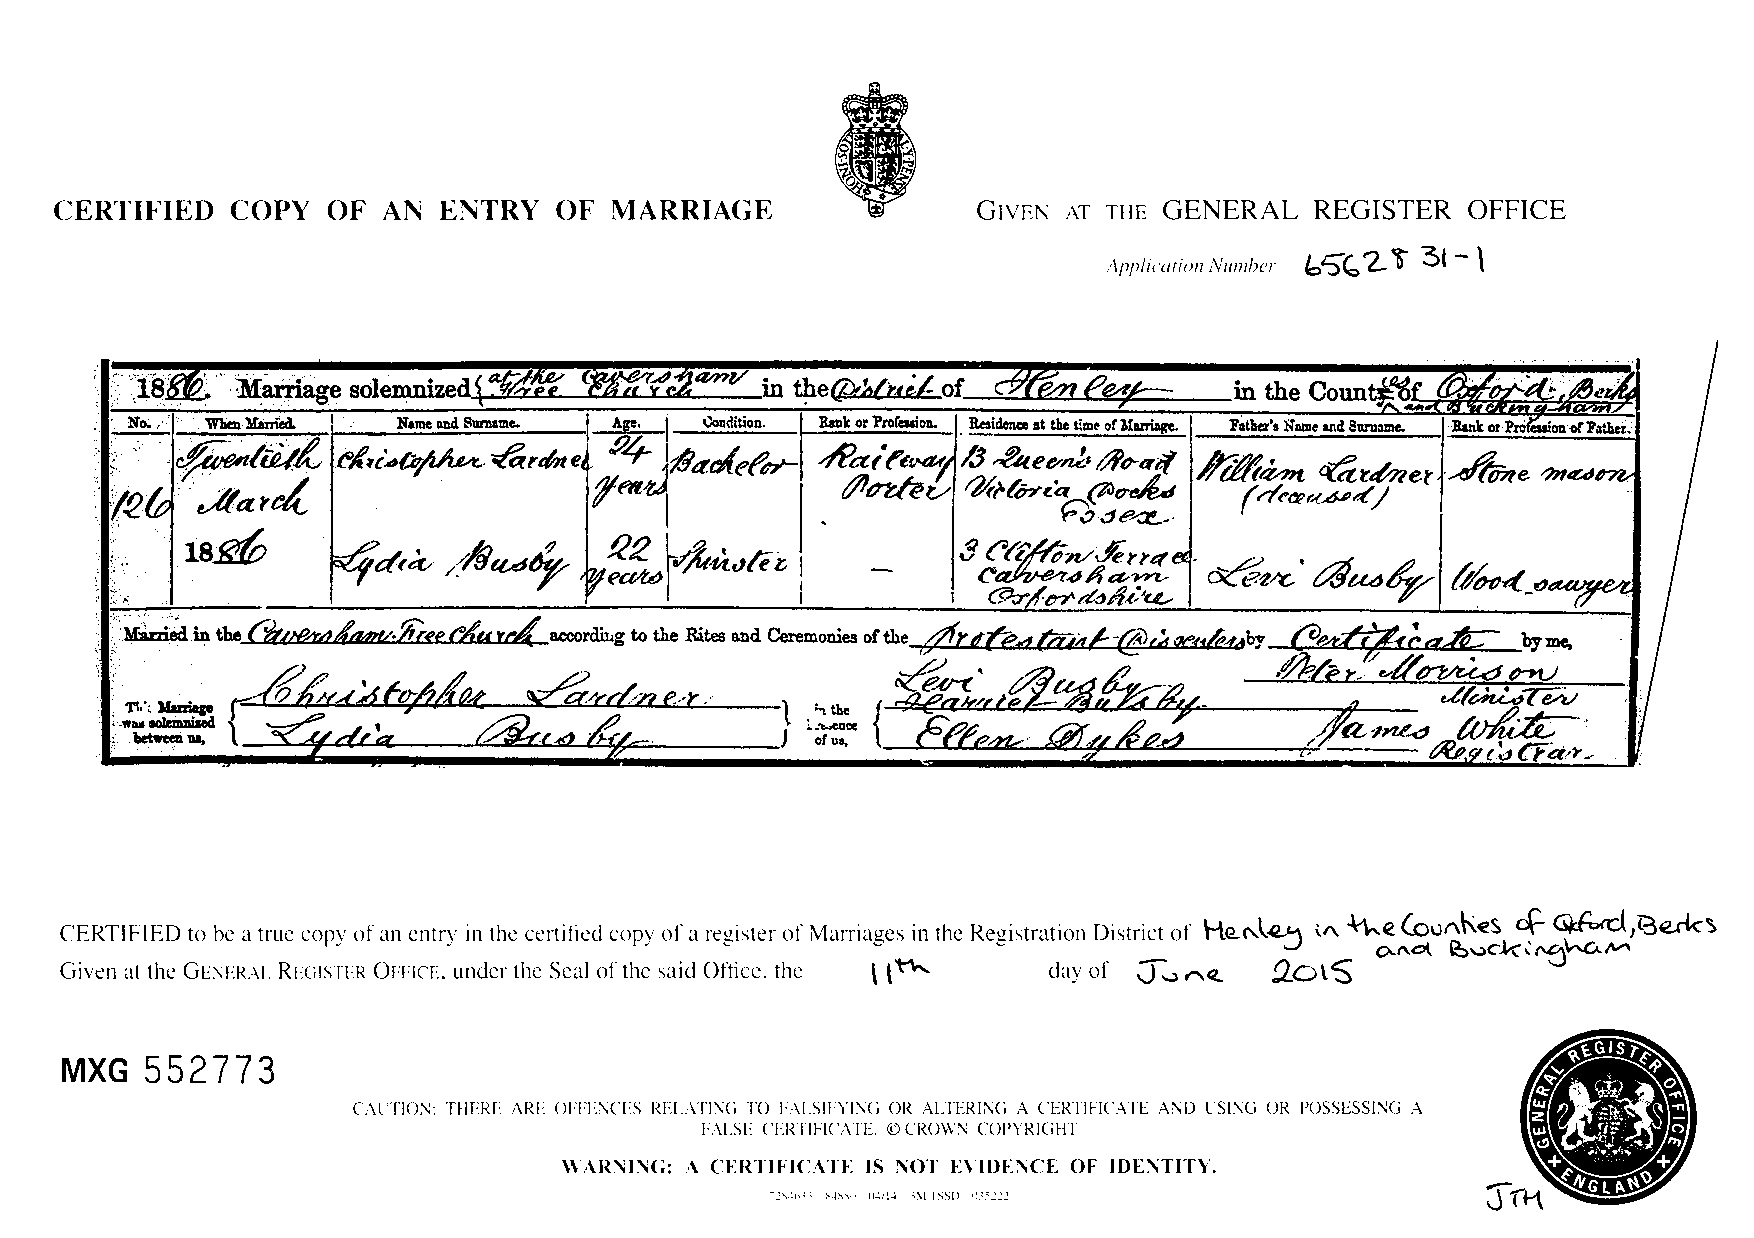 Marriage register for Christopher Lardner and Lydia Busby